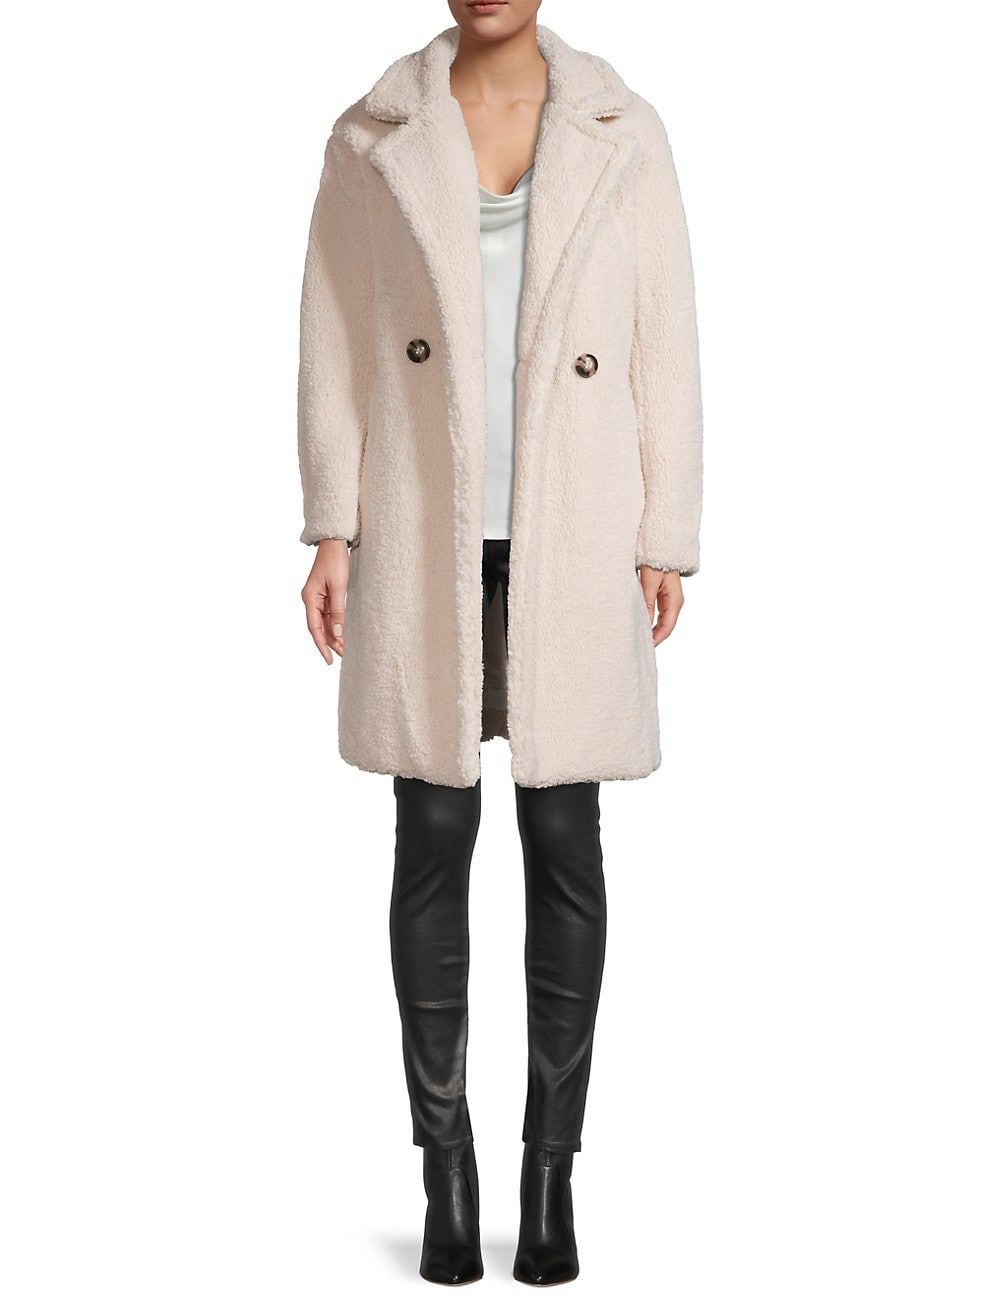 Anouck Double-Breasted Faux Shearling Coat | Saks Fifth Avenue